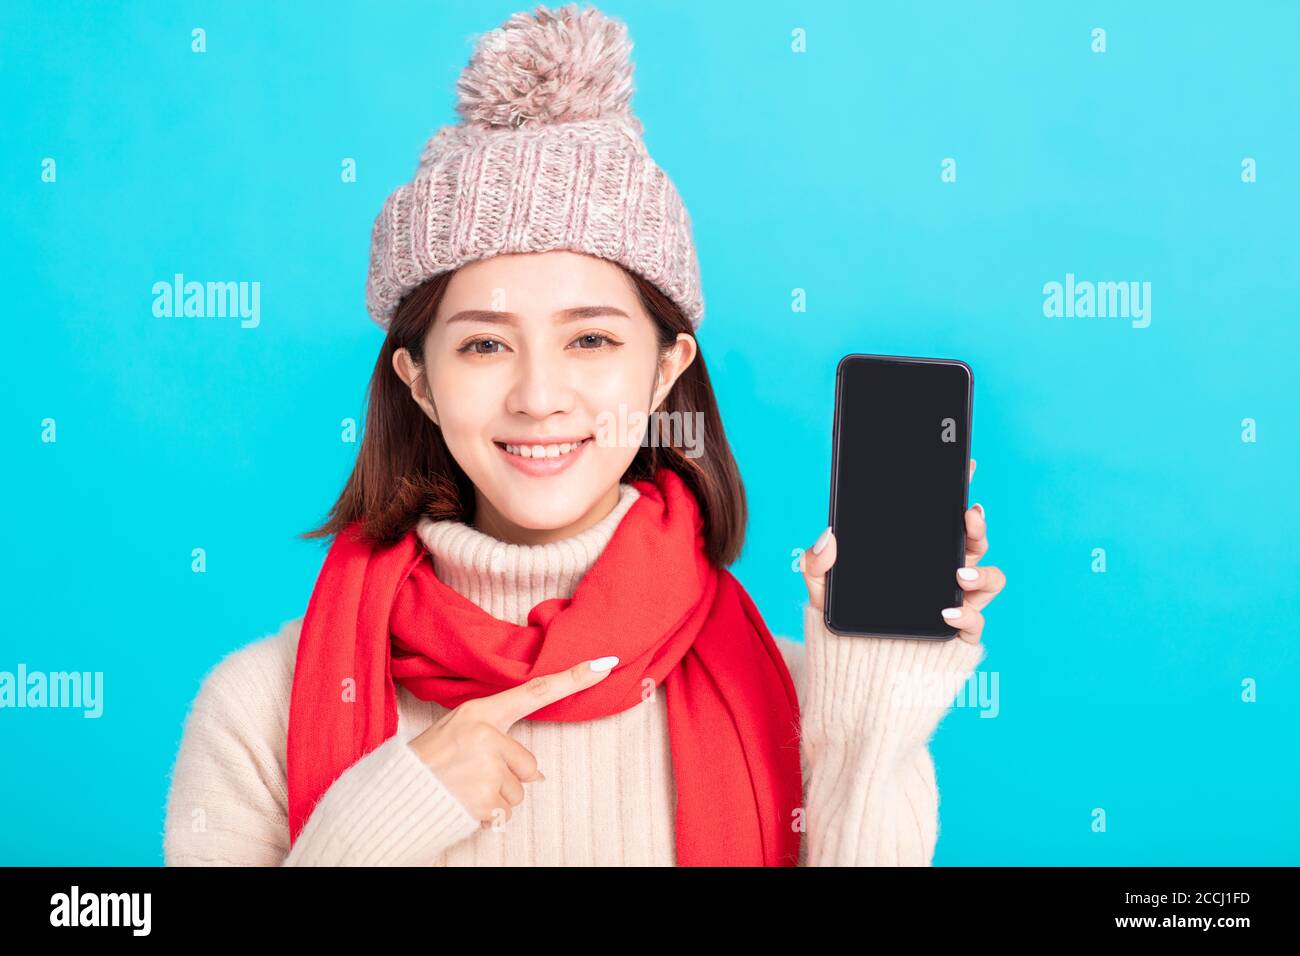 Smiling young woman in winter dress and showing  smart phone Stock Photo